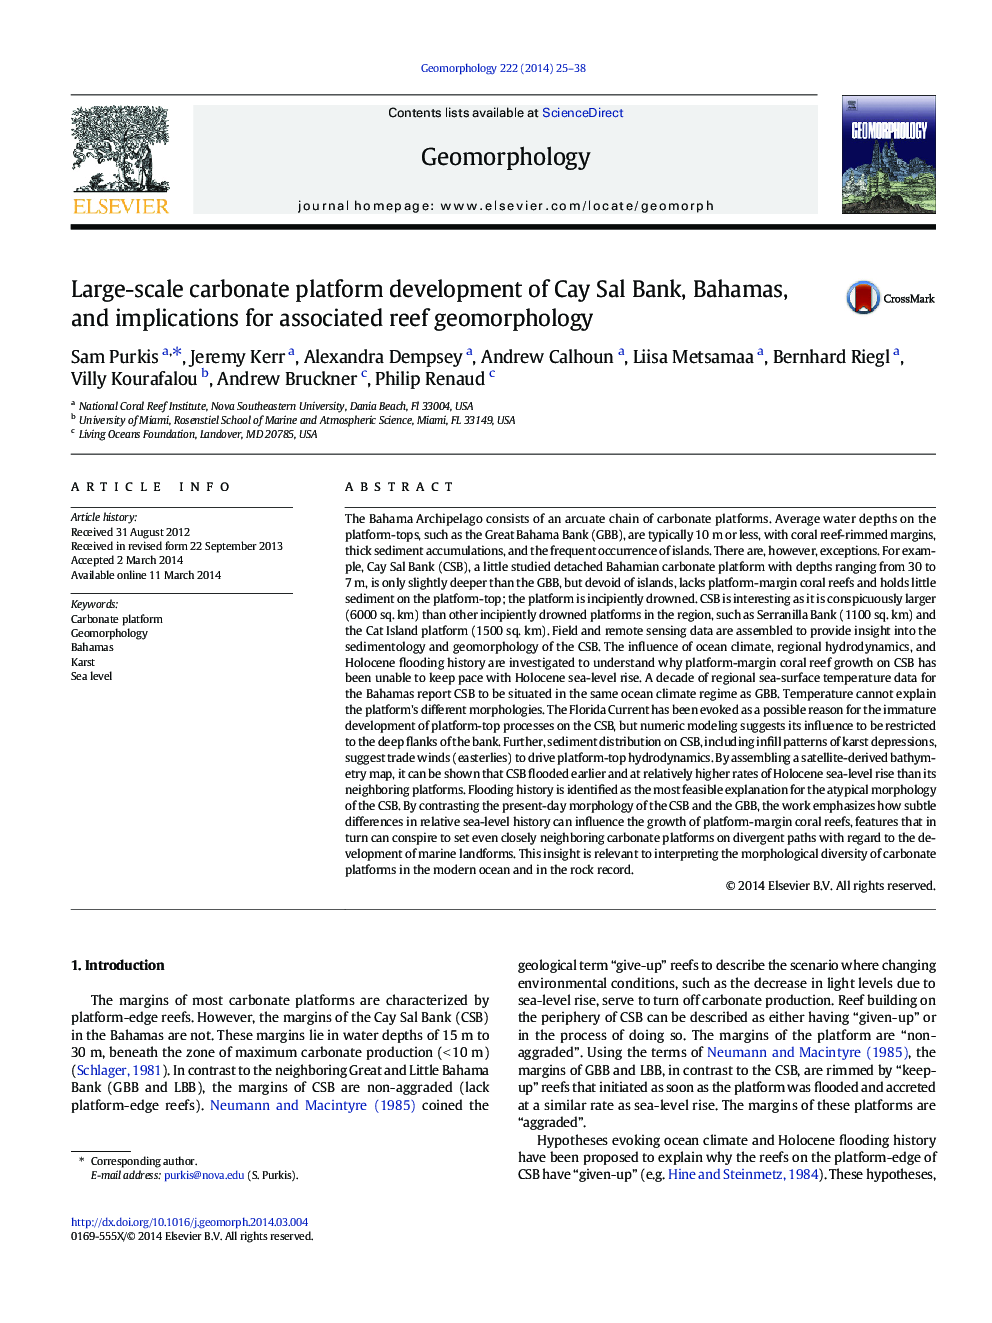 Large-scale carbonate platform development of Cay Sal Bank, Bahamas, and implications for associated reef geomorphology